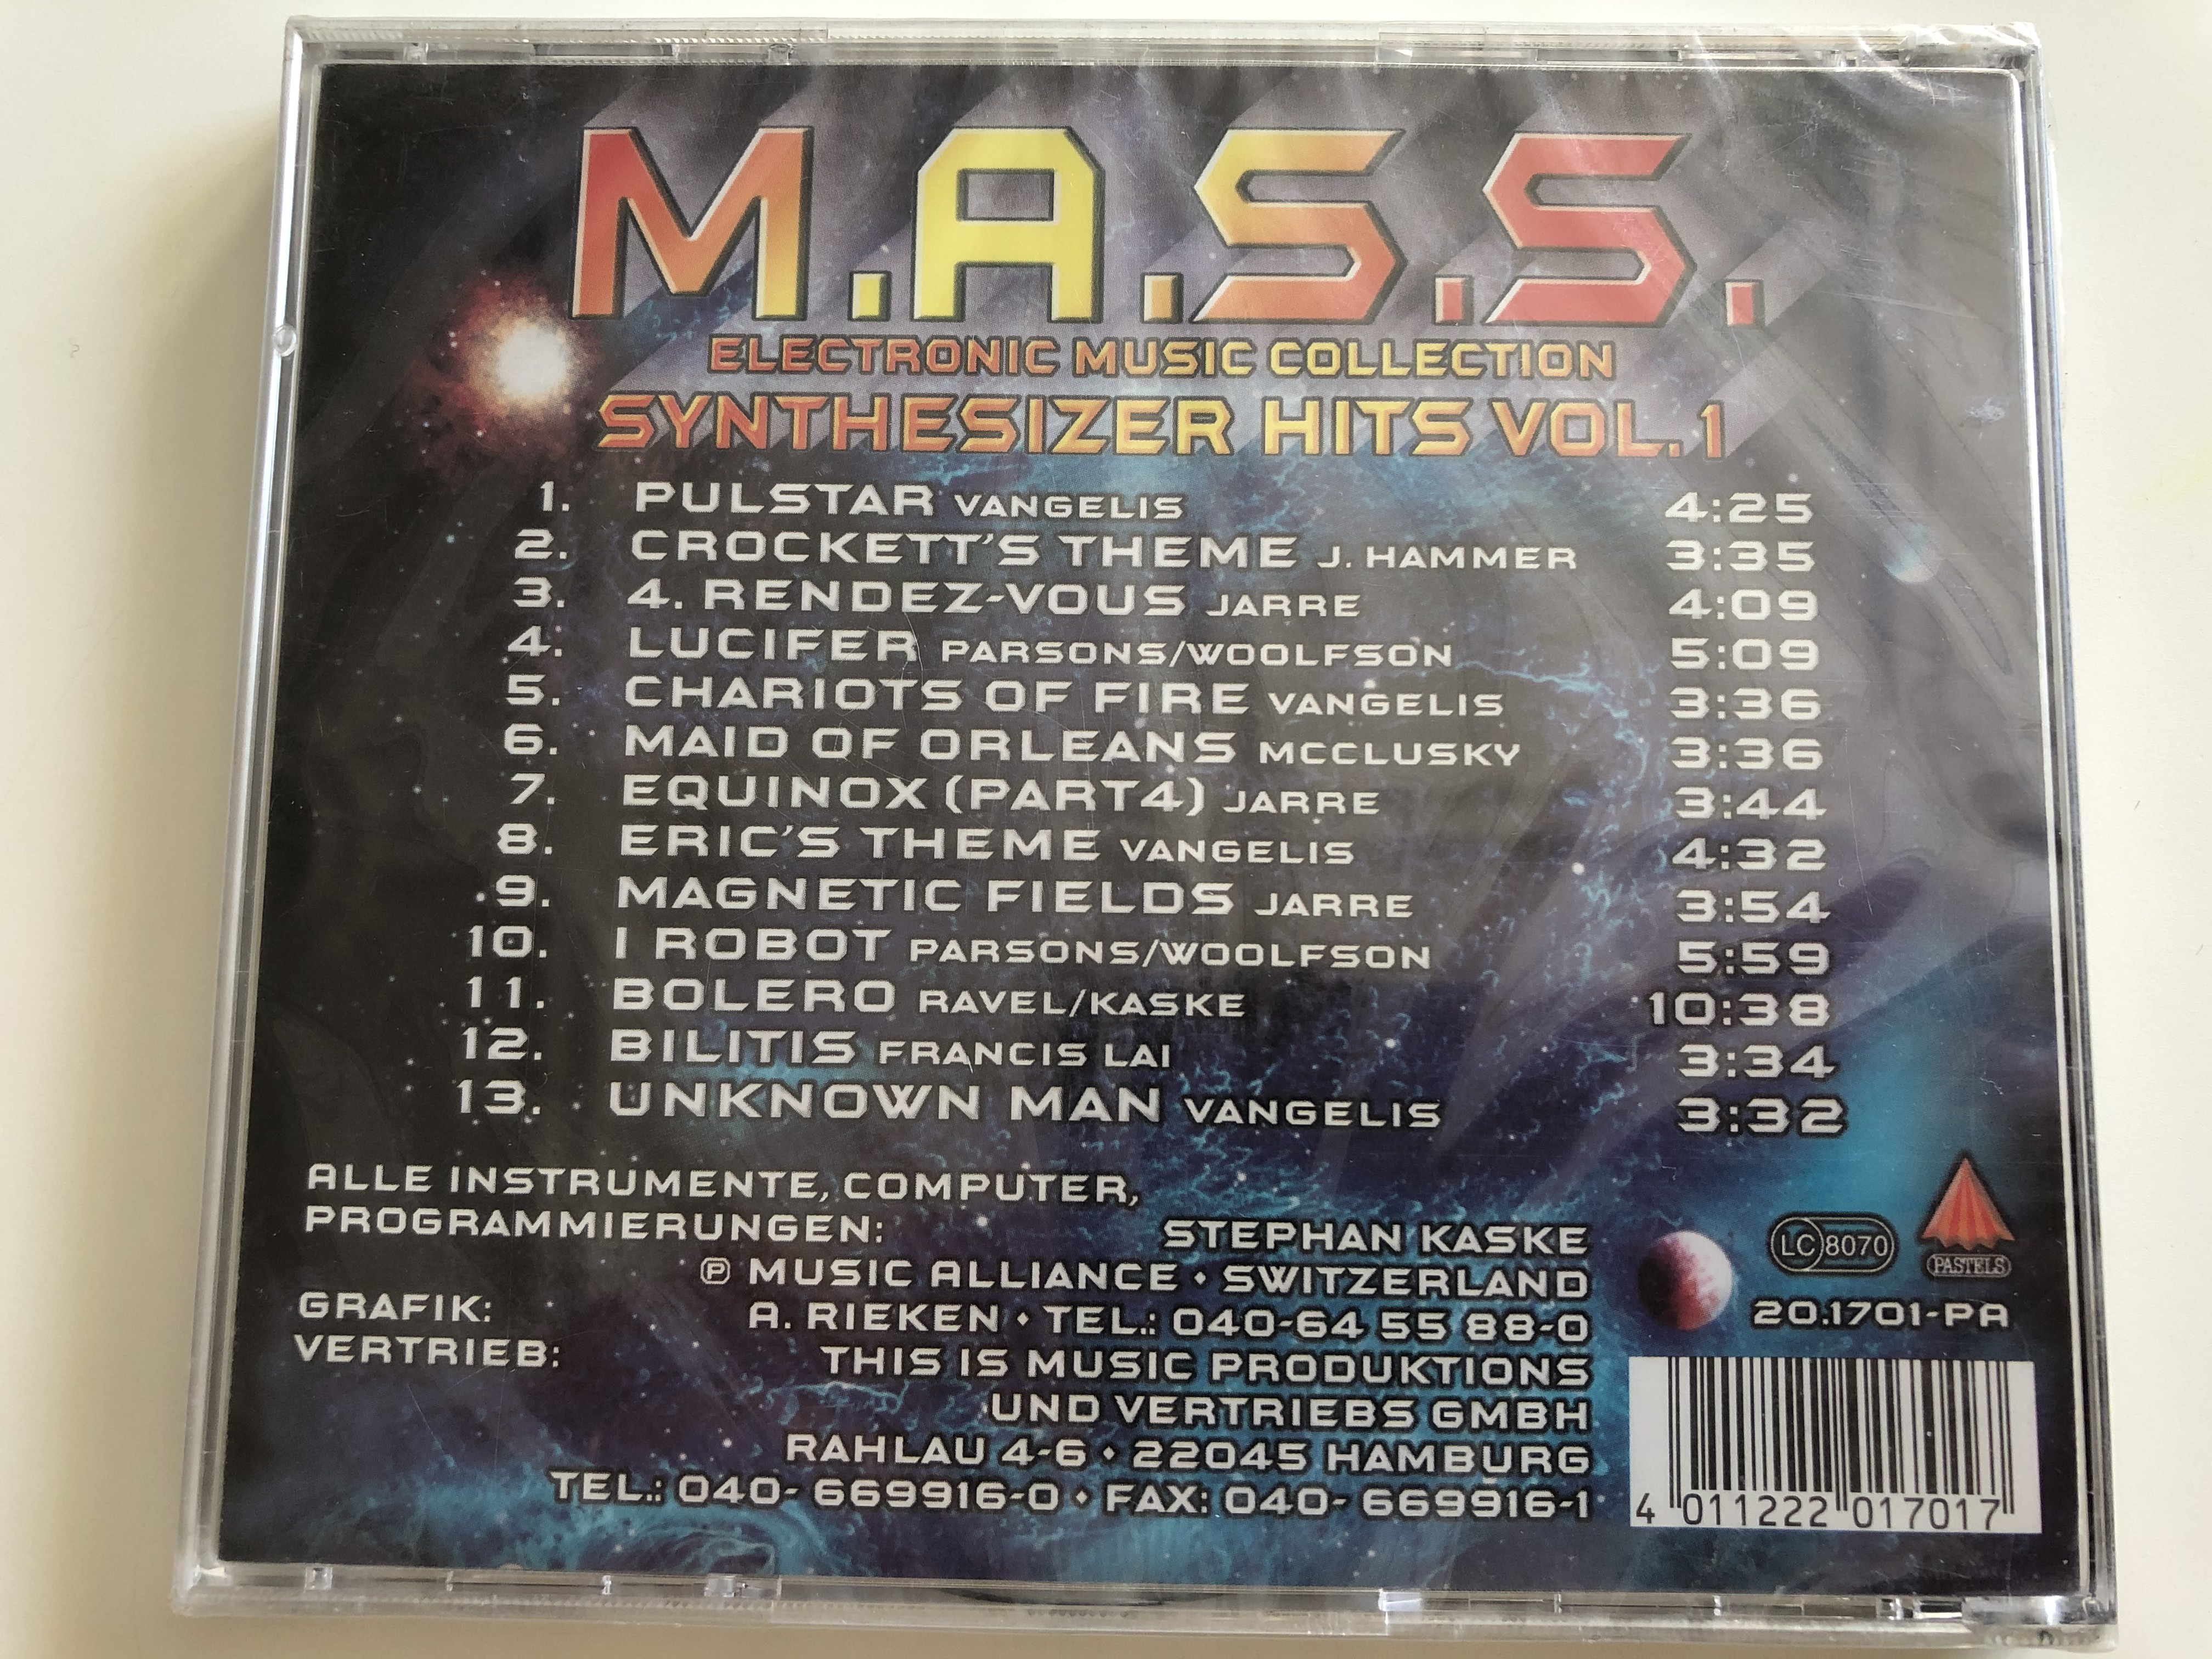 m.a.s.s.-electronic-music-collection-synthesizer-hits-vol.-1-featuring-crockett-s-theme-by-j.-hammer-rendez-vous-by-jarre-chariots-of-fire-by-vangelis-and-many-more-pastels-audio-cd-20-.jpg